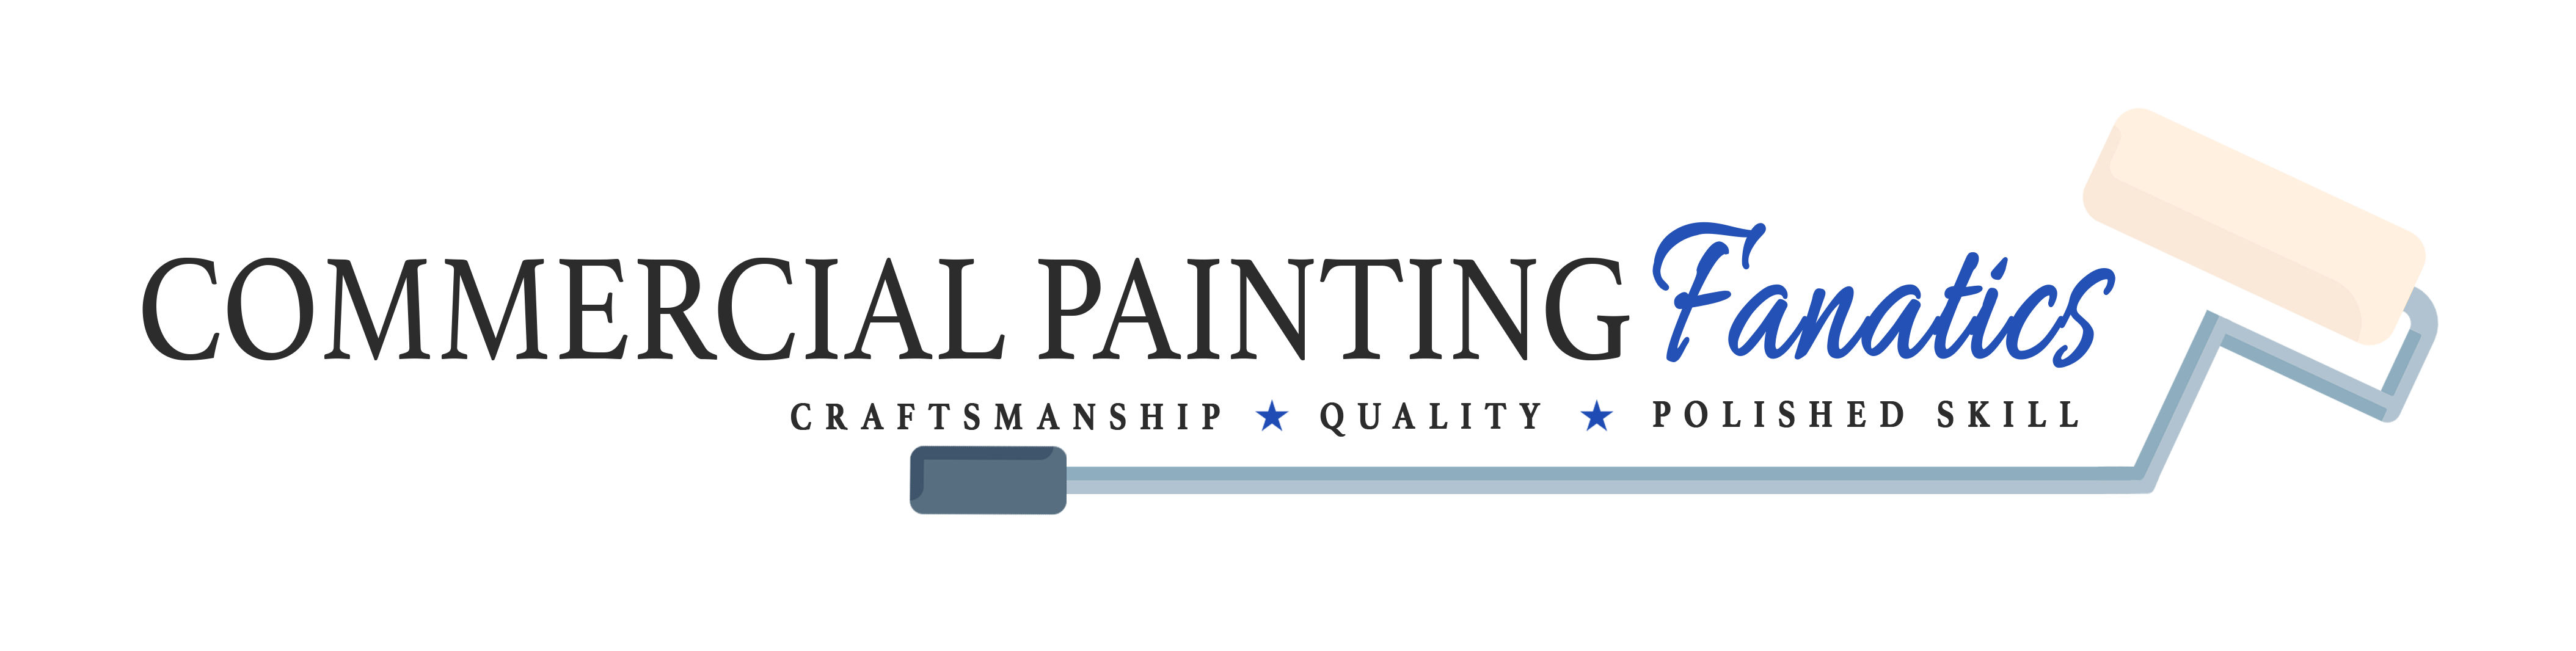 Commercial Painters Pittsburgh Pennsylvania